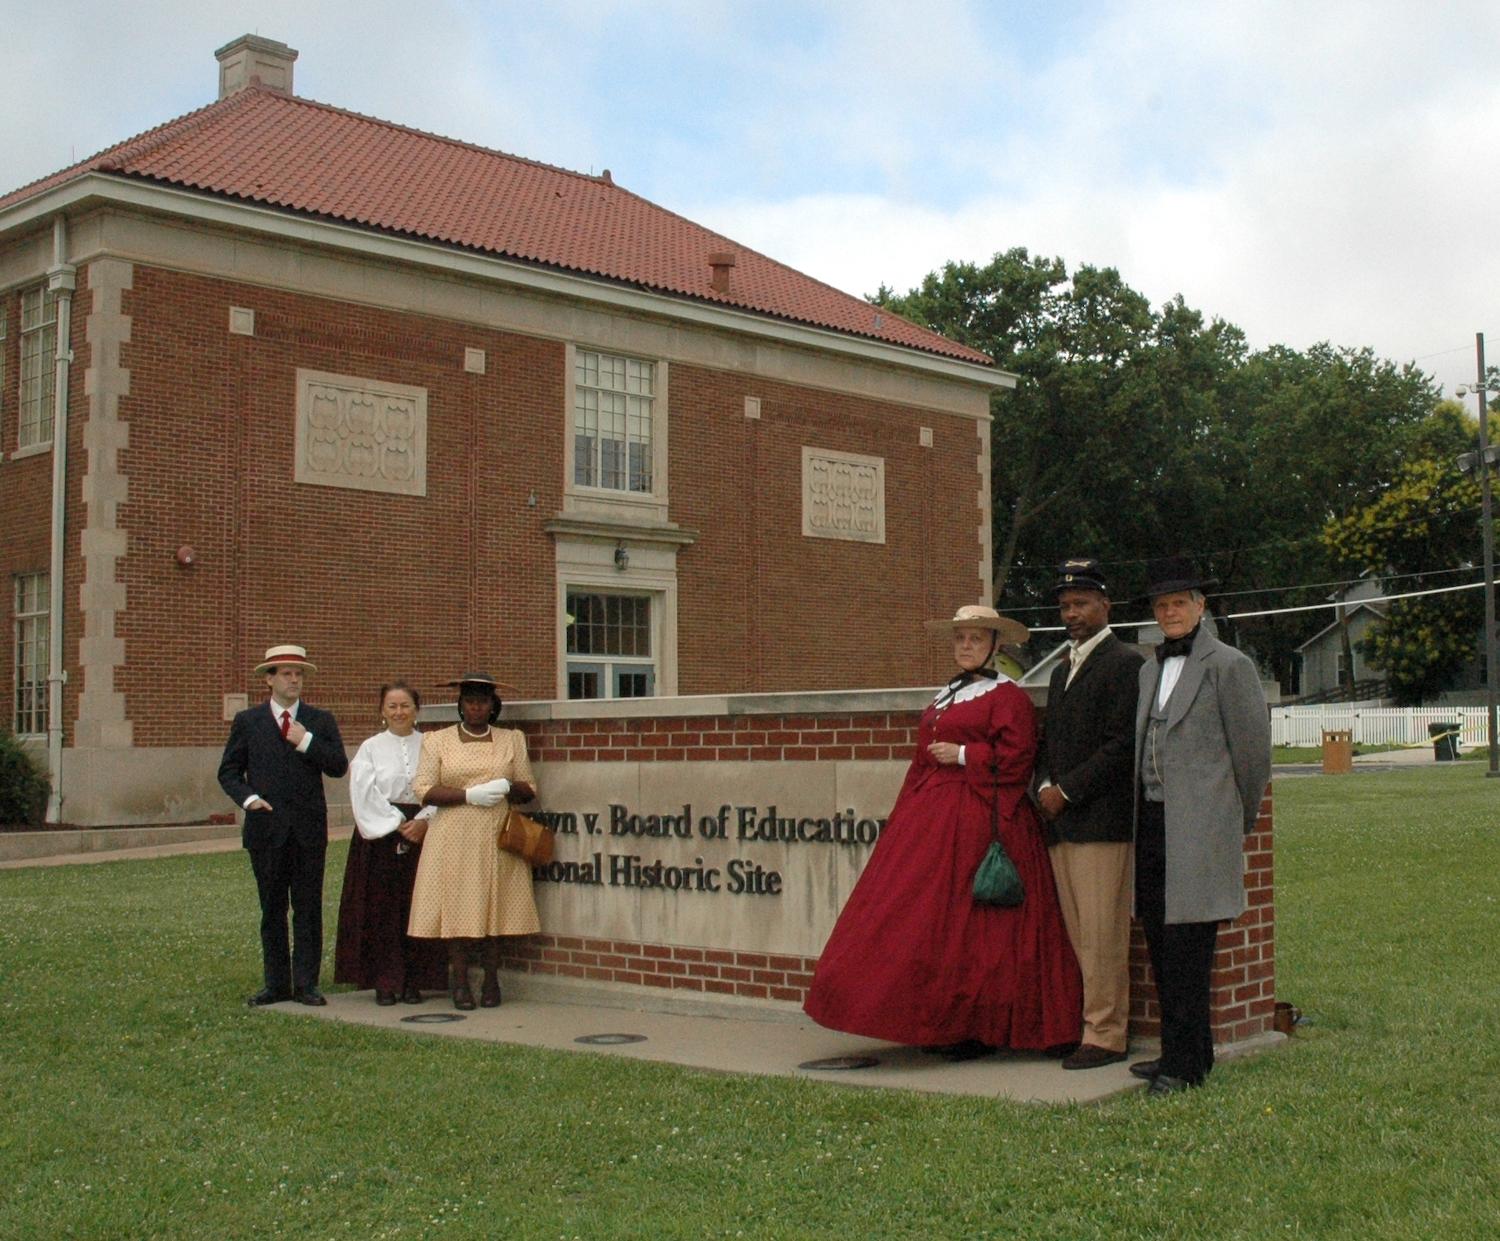 At Brown v. Board of Education National Historic Sites, there are living history walks that feature six re-enactors portraying characters from 1854 to 1954 and linked neighborhood stories to national stories of Civil War and civil rights/NPS